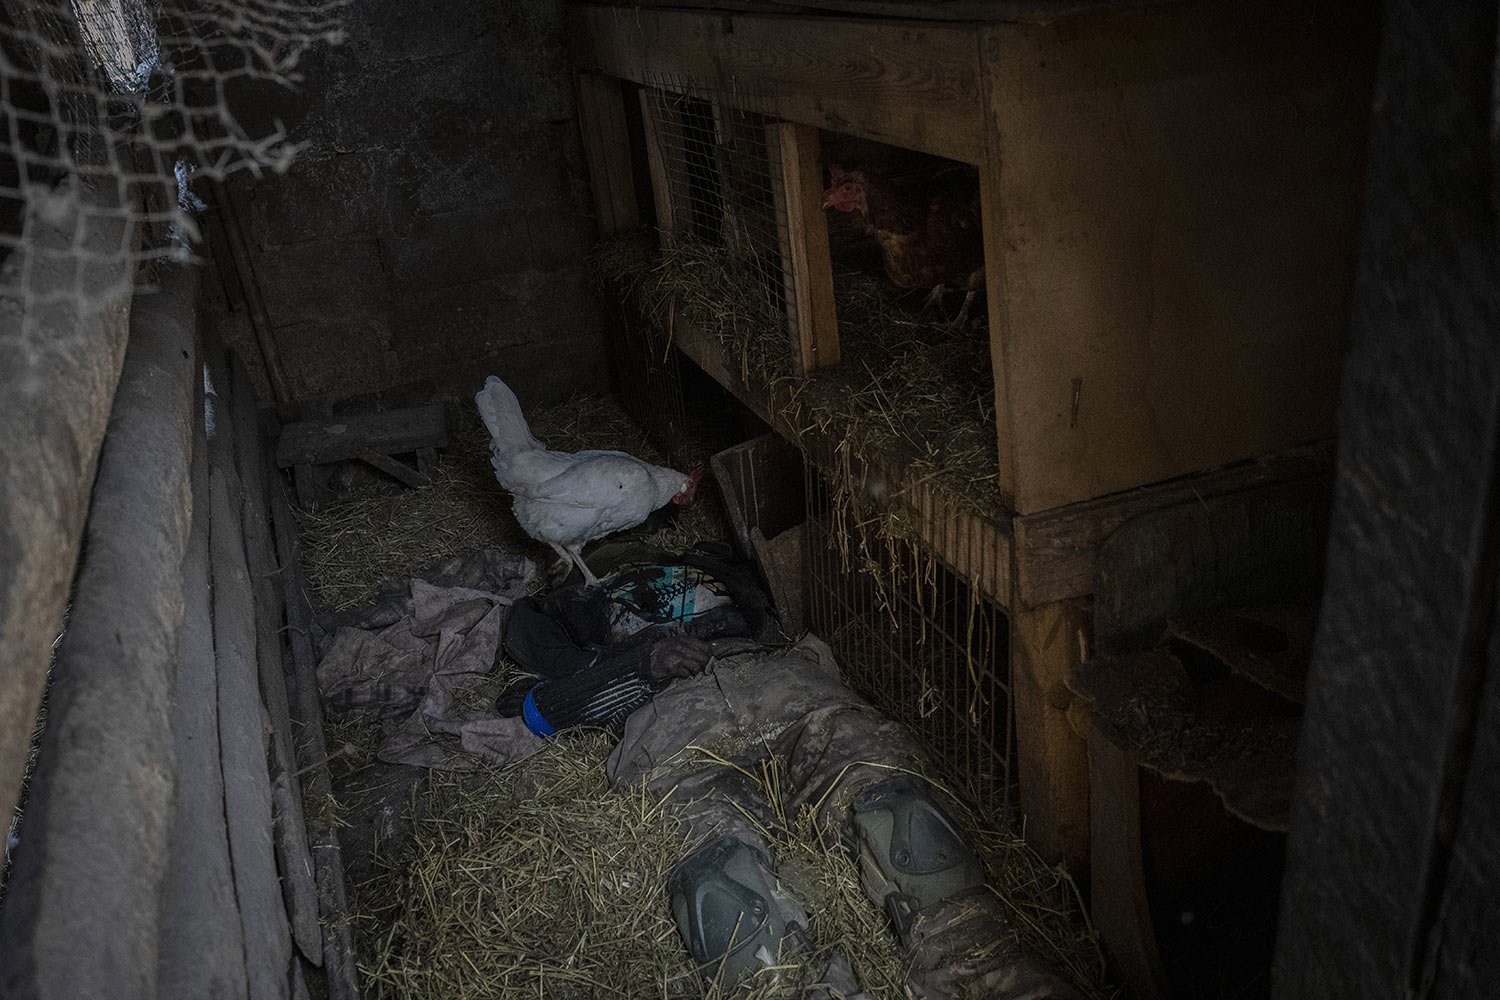  The body of a Russian soldier lies inside a henhouse in Vilkhivka on the outskirts of Kharkiv, eastern Ukraine, Friday, May 20, 2022. (AP Photo/Bernat Armangue) 